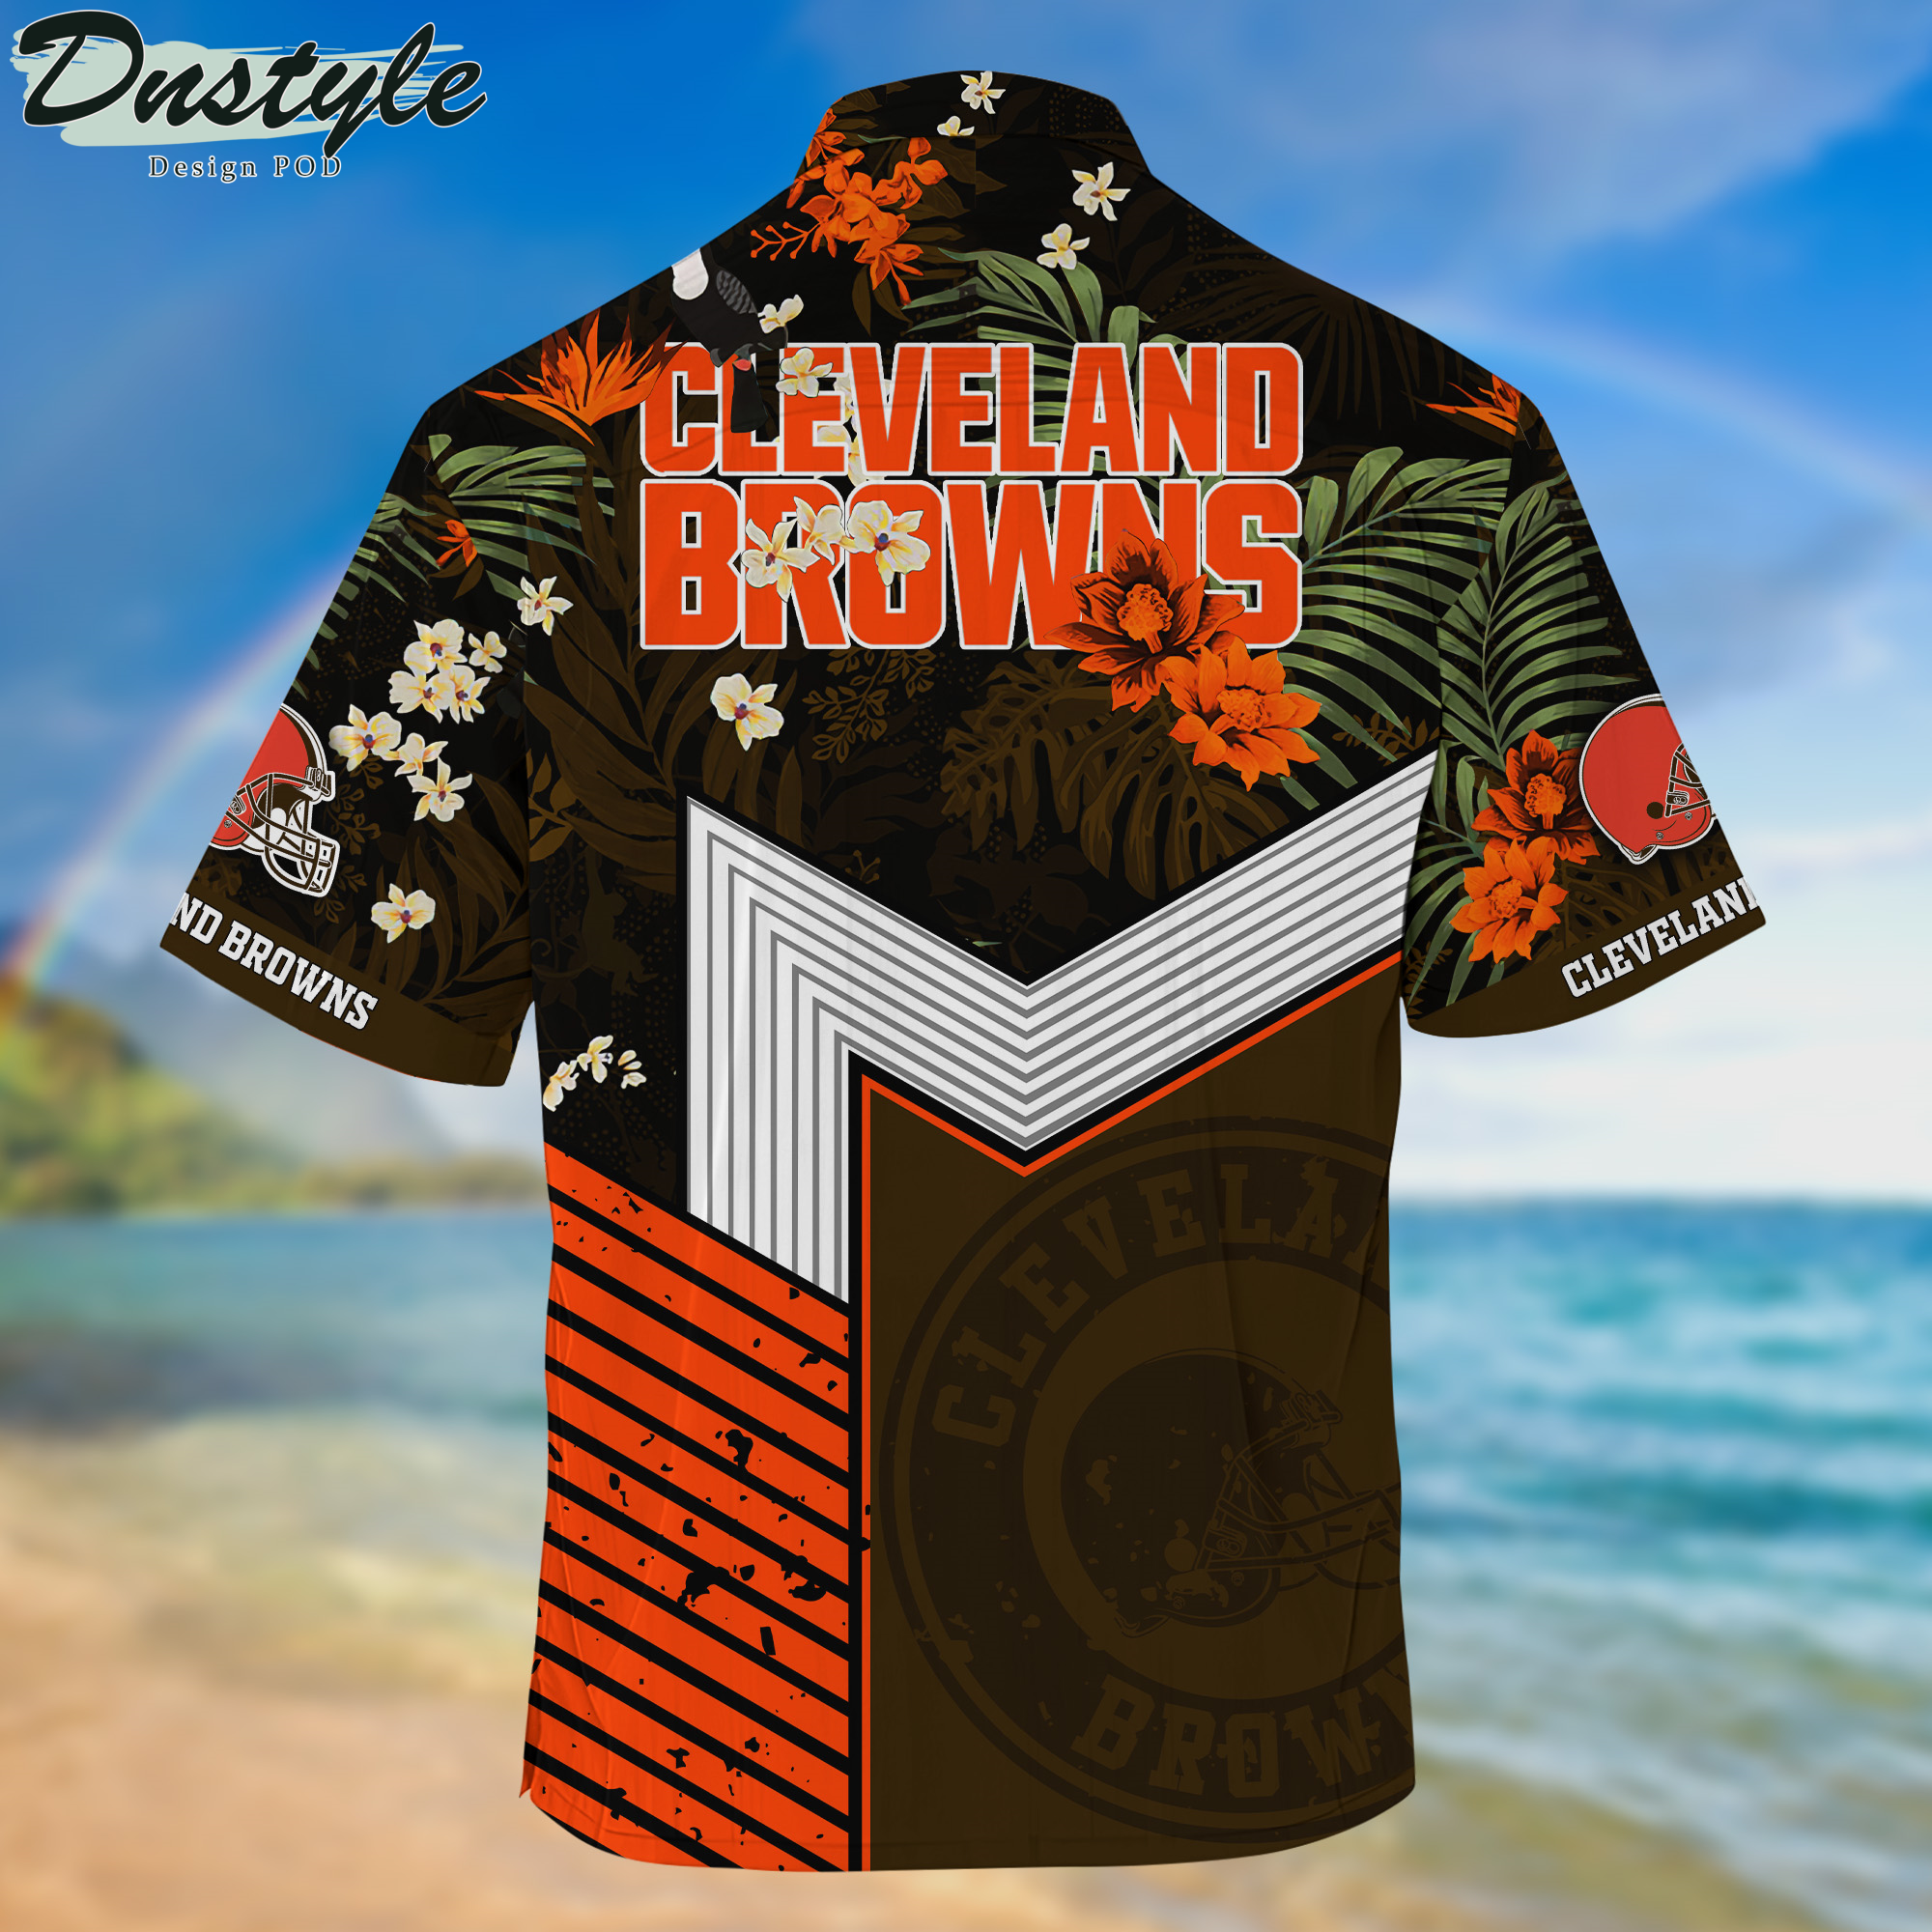 Cleveland Browns Hawaii Shirt And Shorts New Collection